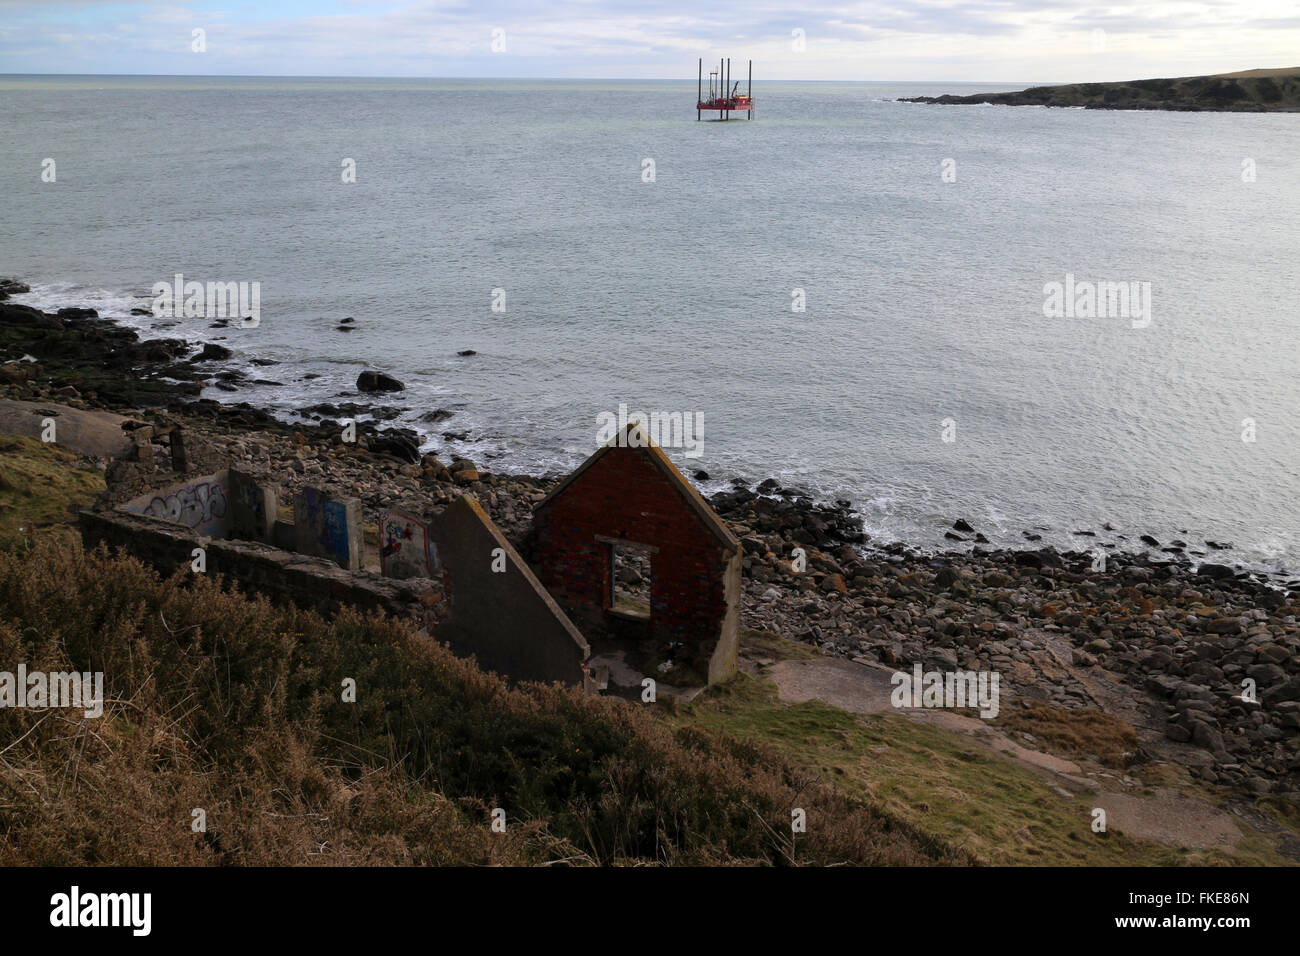 Nigg bay - Pebbles beach and rig in the distance - Aberdeen city - Scotland - UK Stock Photo